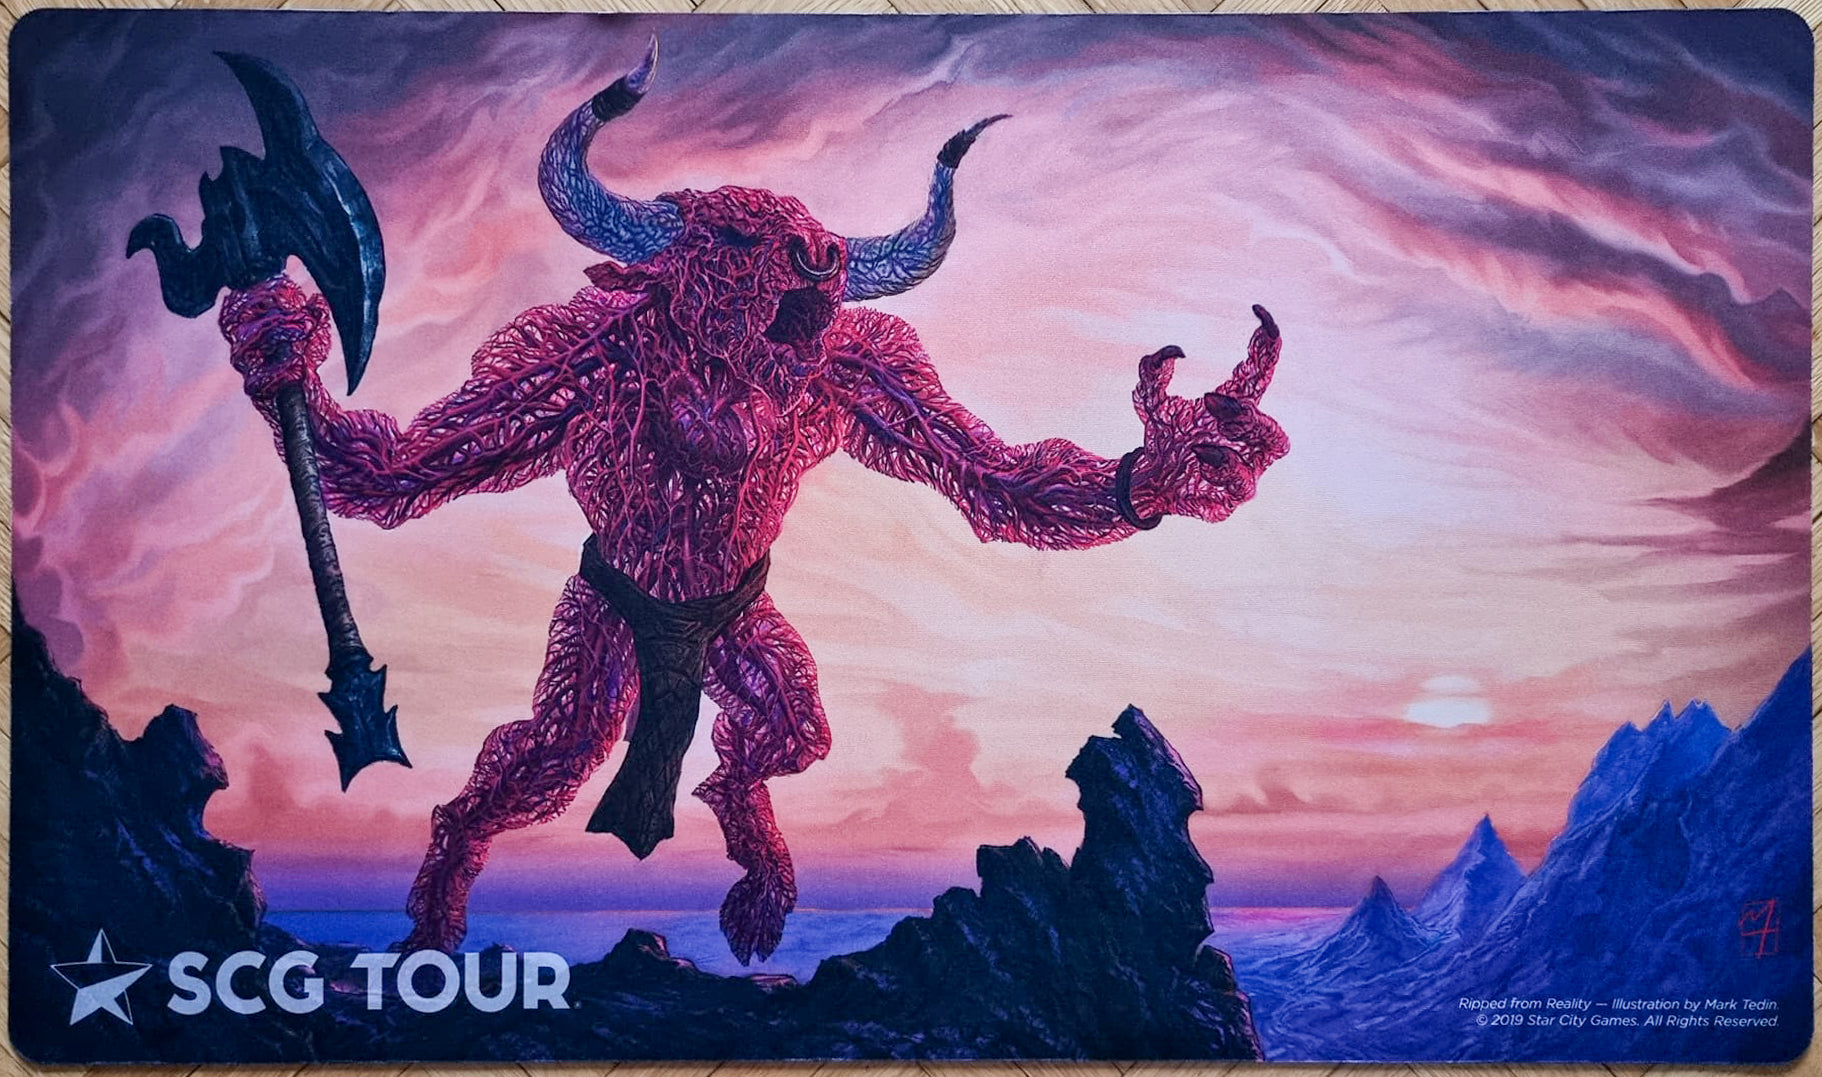 Ripped from Reality - Mark Tedin - SCG Tour - MTG Playmat